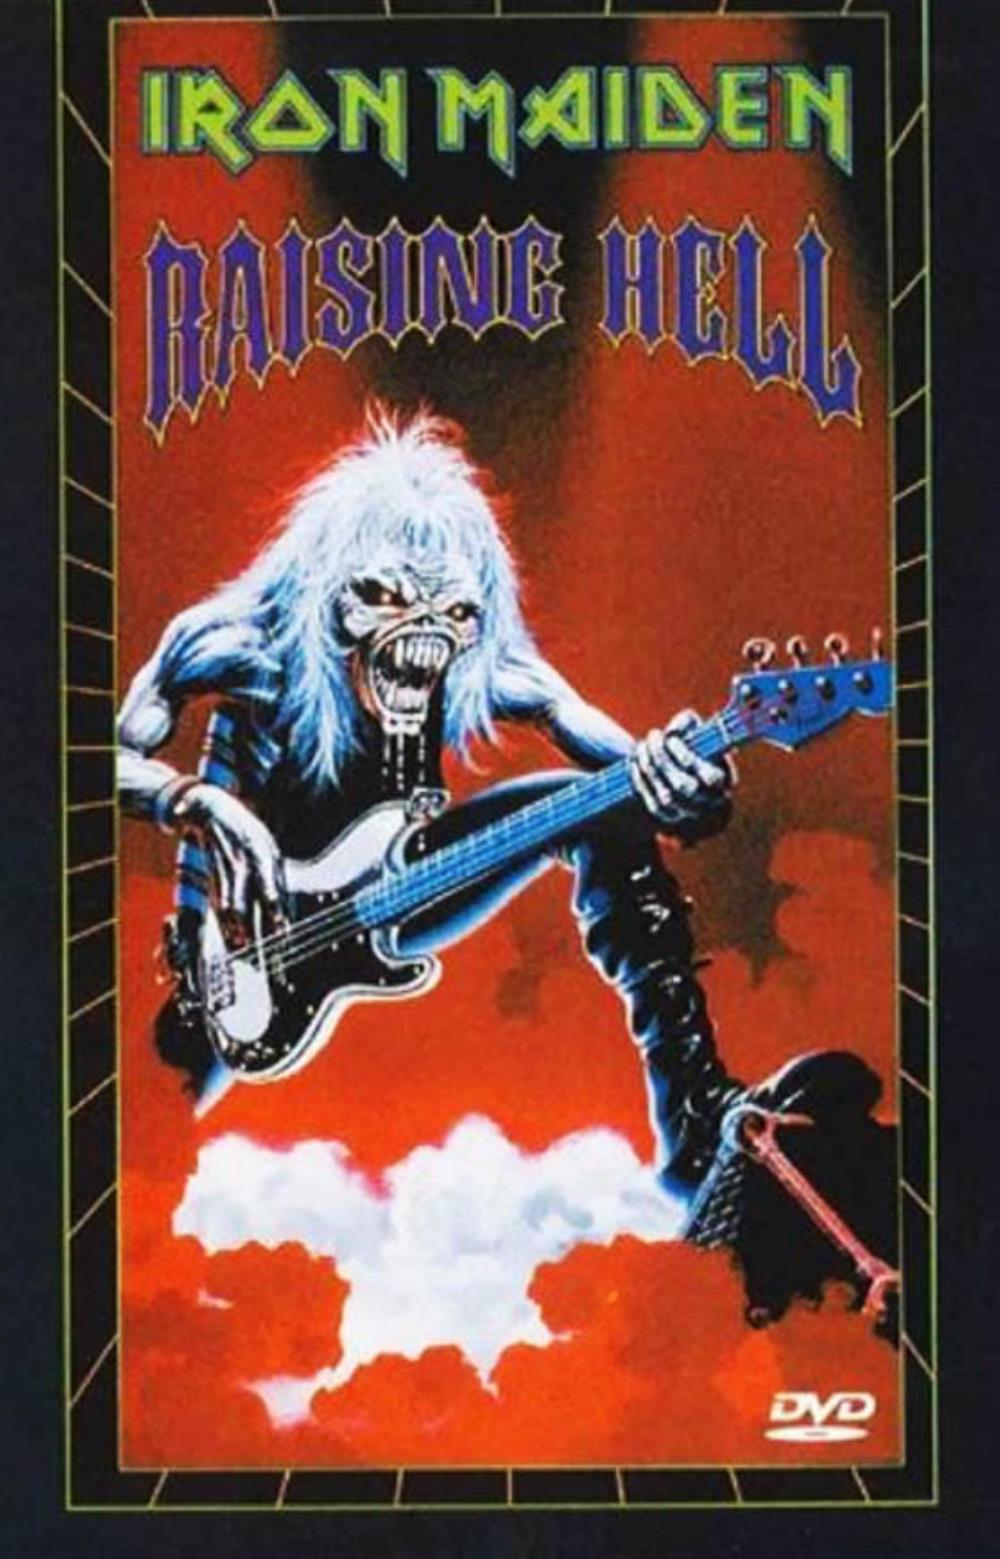  Raising Hell by IRON MAIDEN album cover